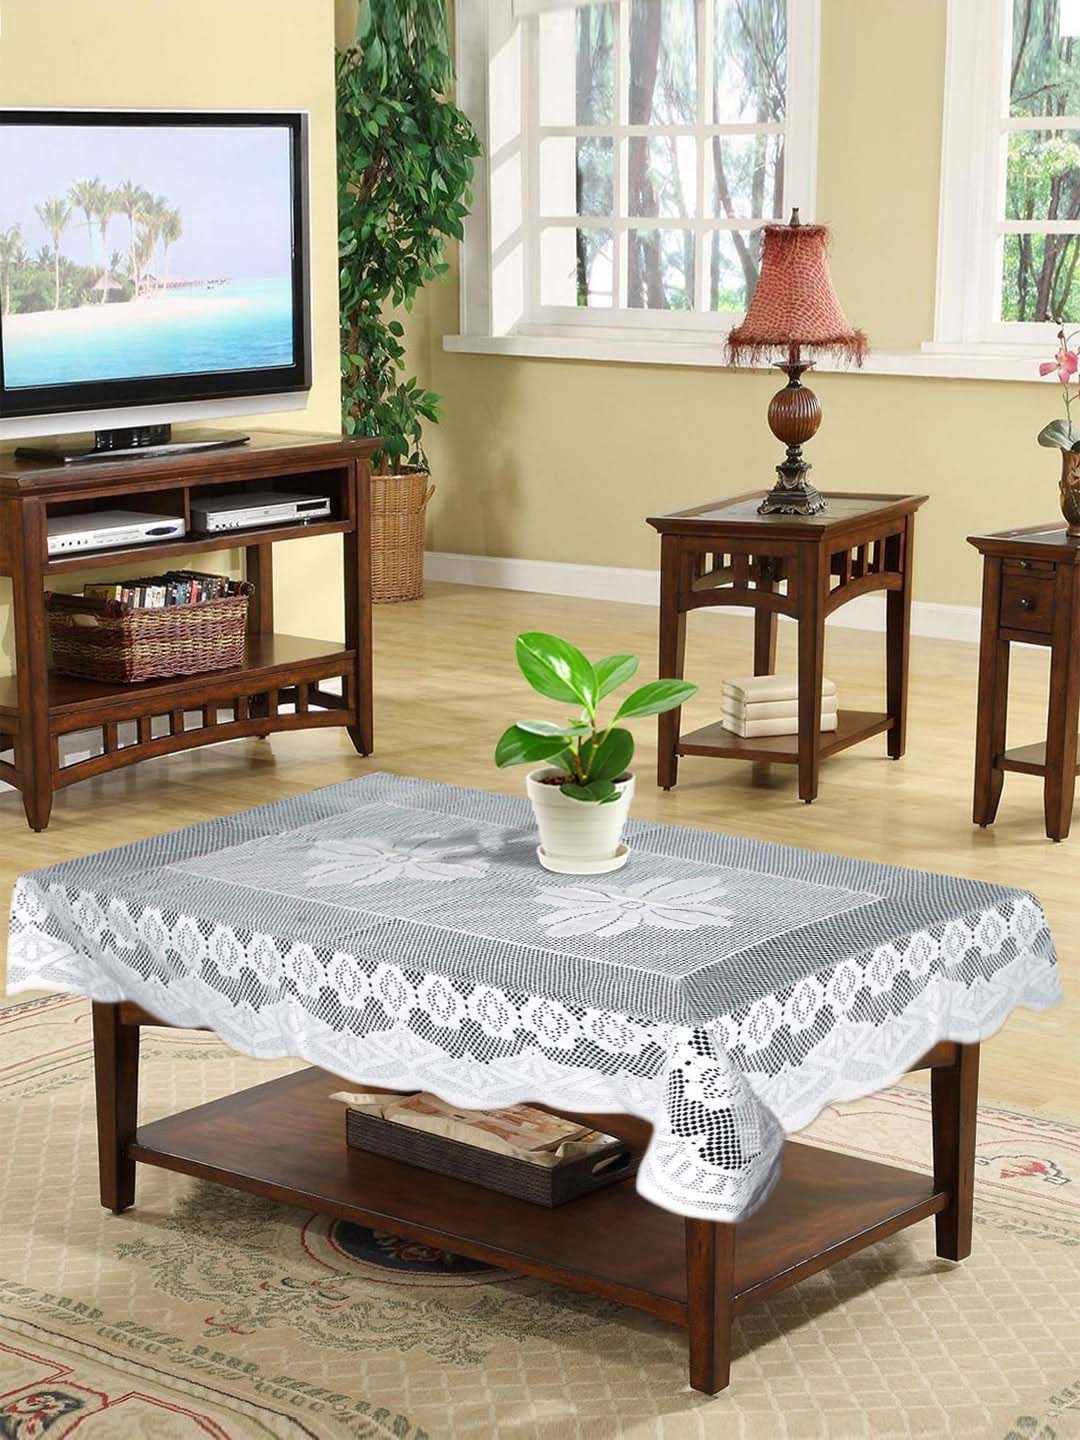 Kuber Industries White   Grey Printed 4 Seater Cotton Table Cover